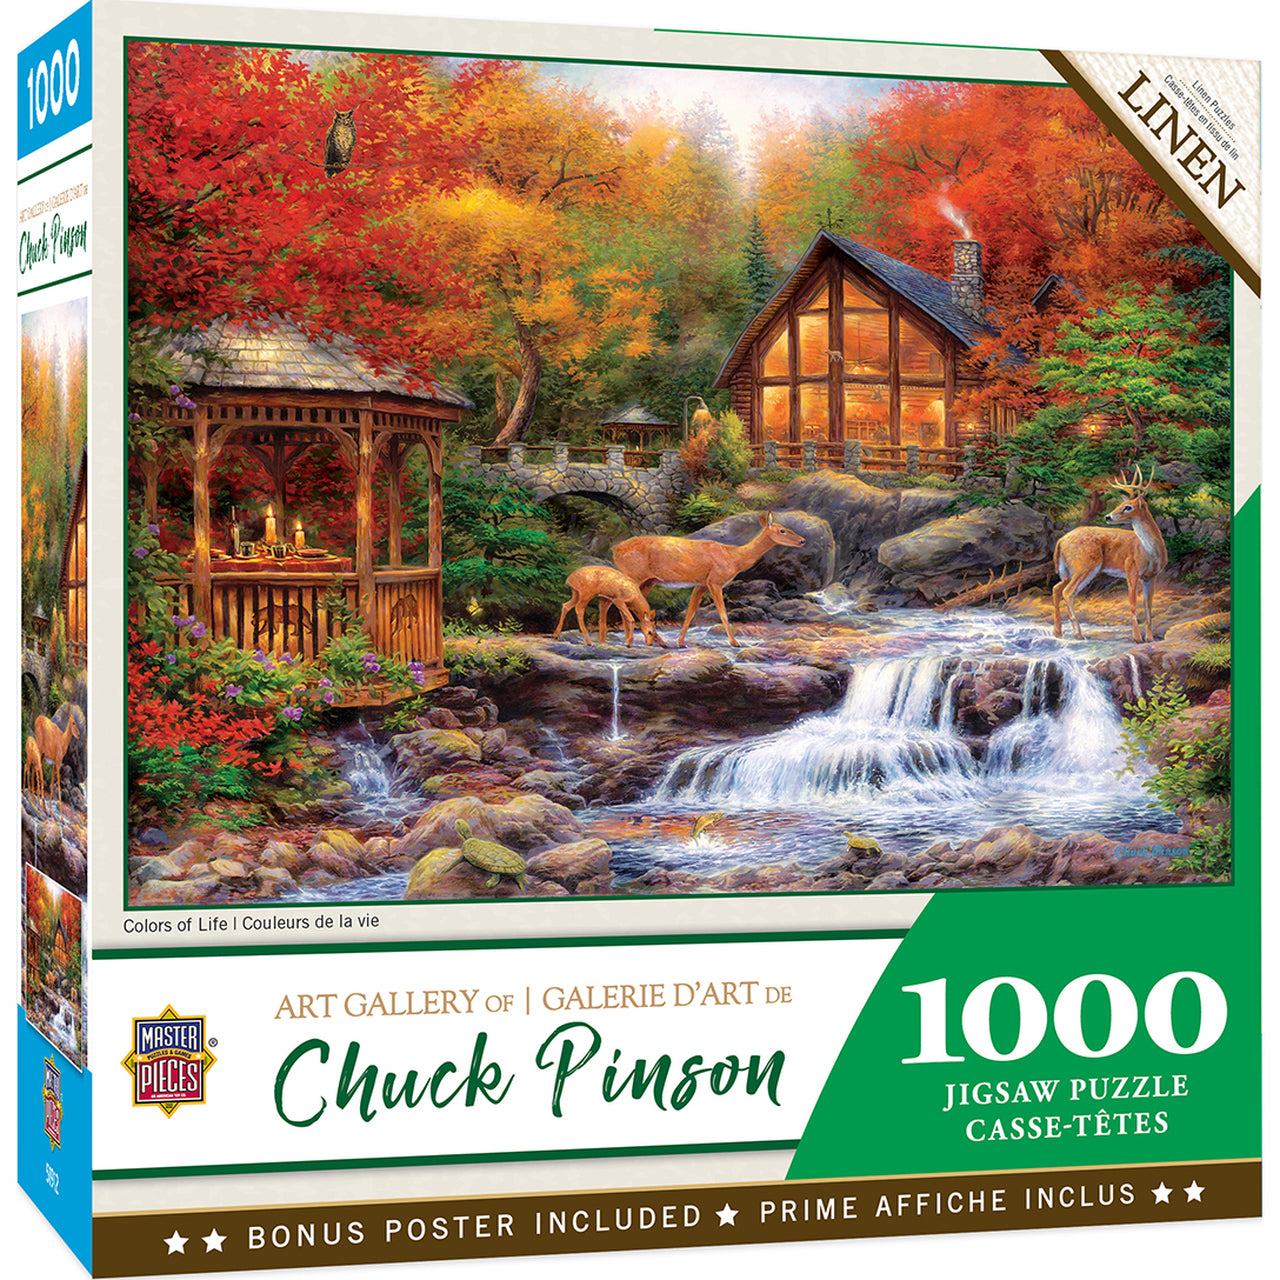 Chuck Pinson Gallery - Colors of Life - 1000 Piece Jigsaw Puzzle by Masterpieces